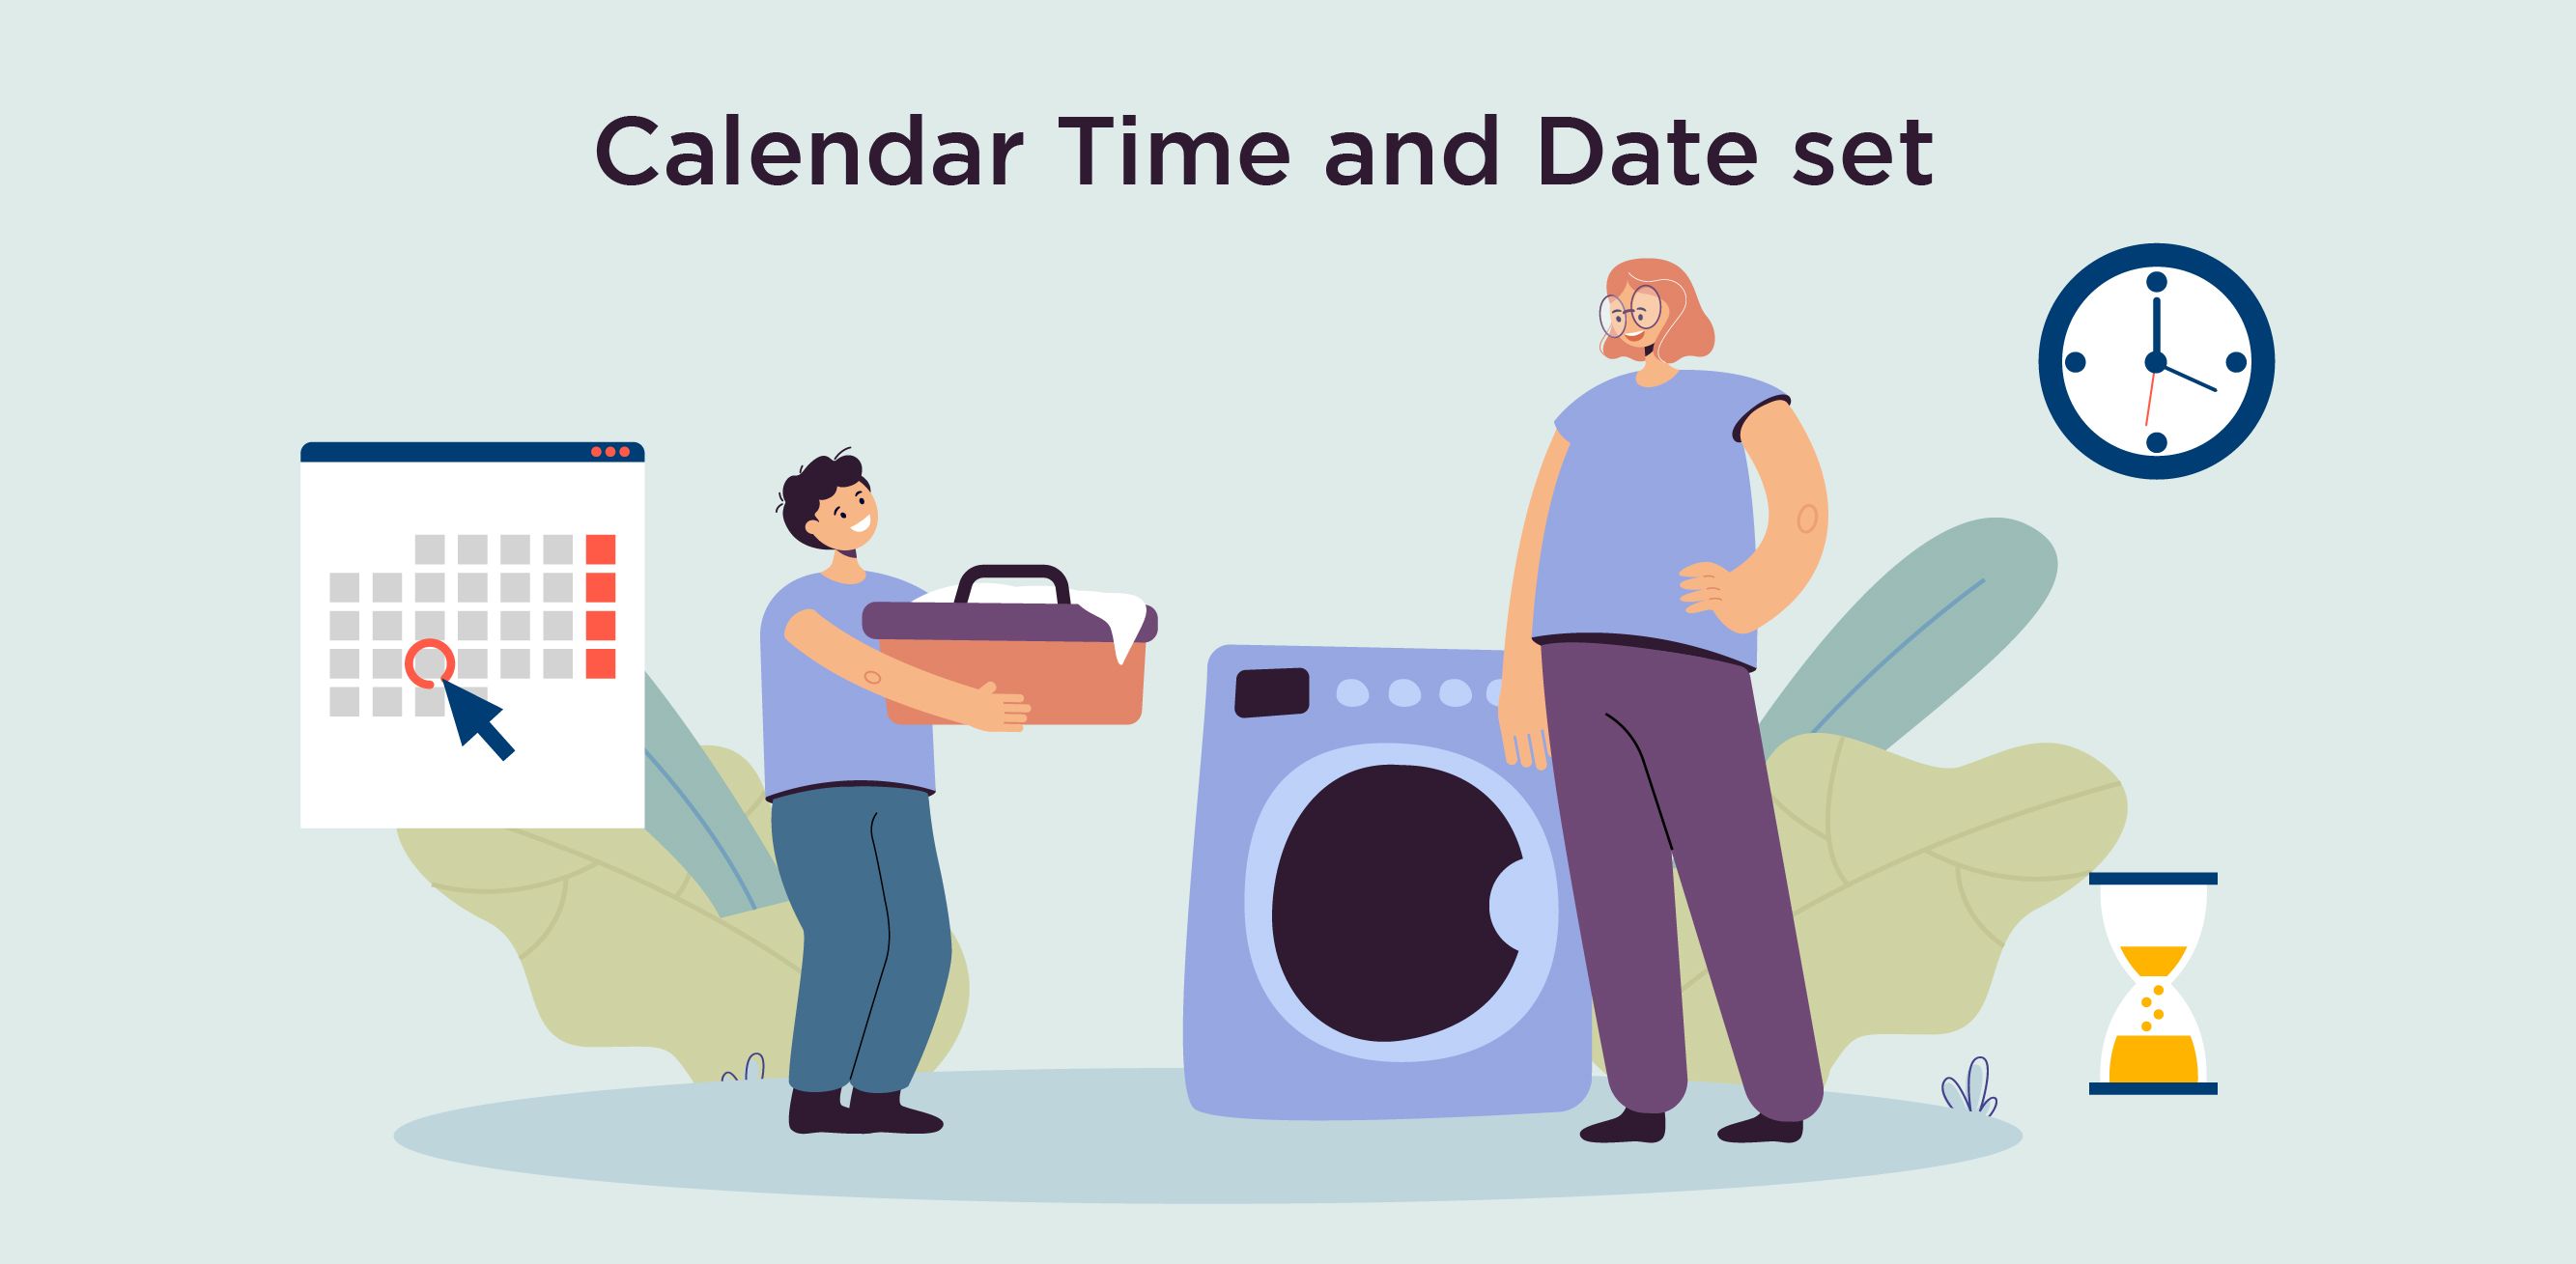 Calendar Time and Date set